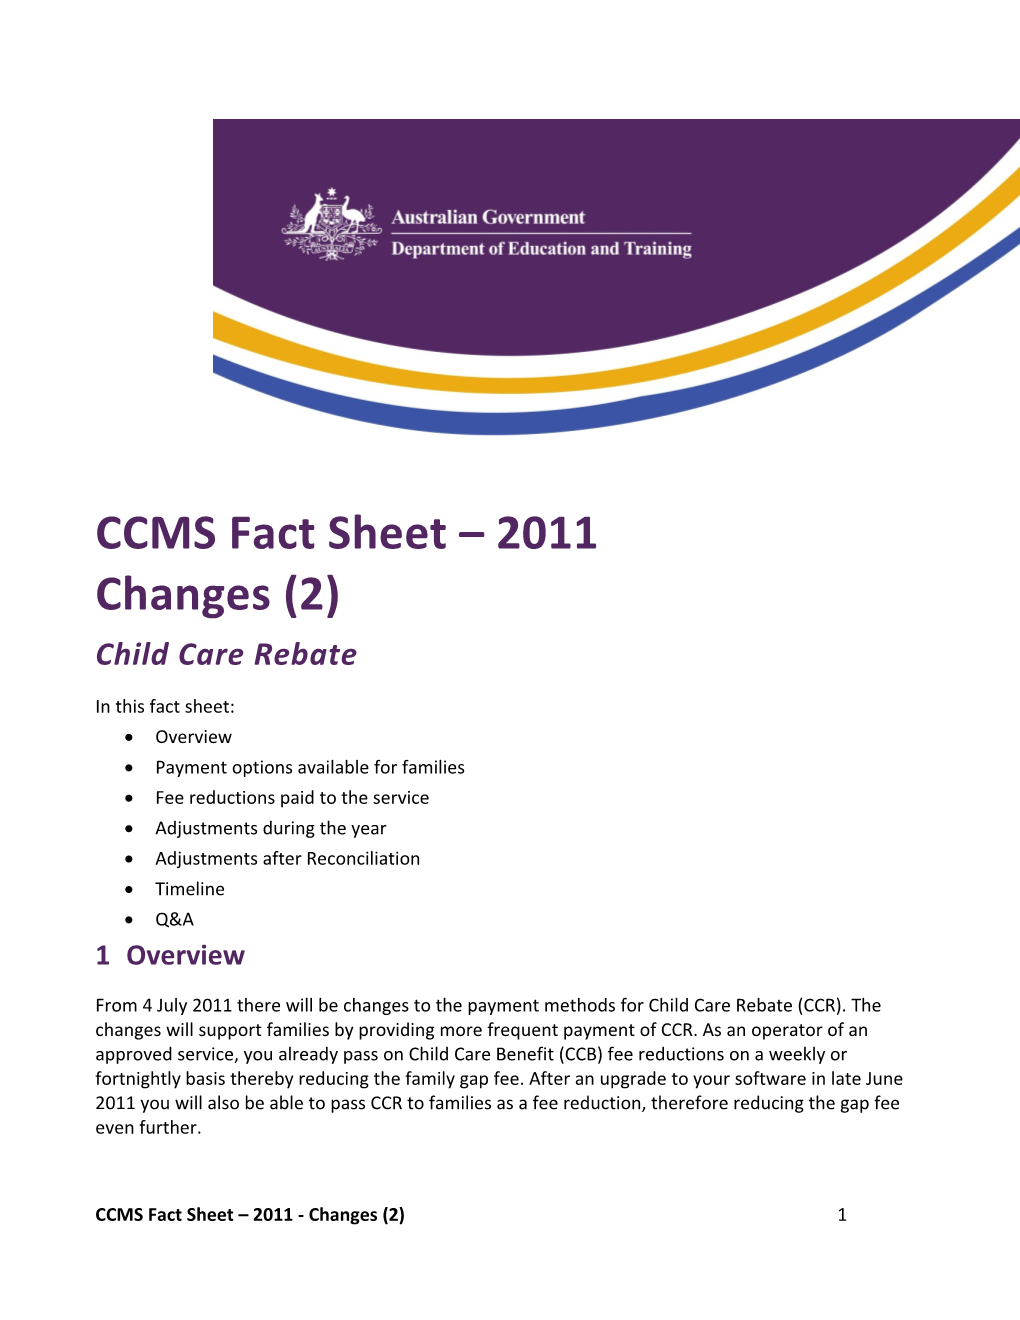 CCMS Fact Sheet 2011 - Changes (2)